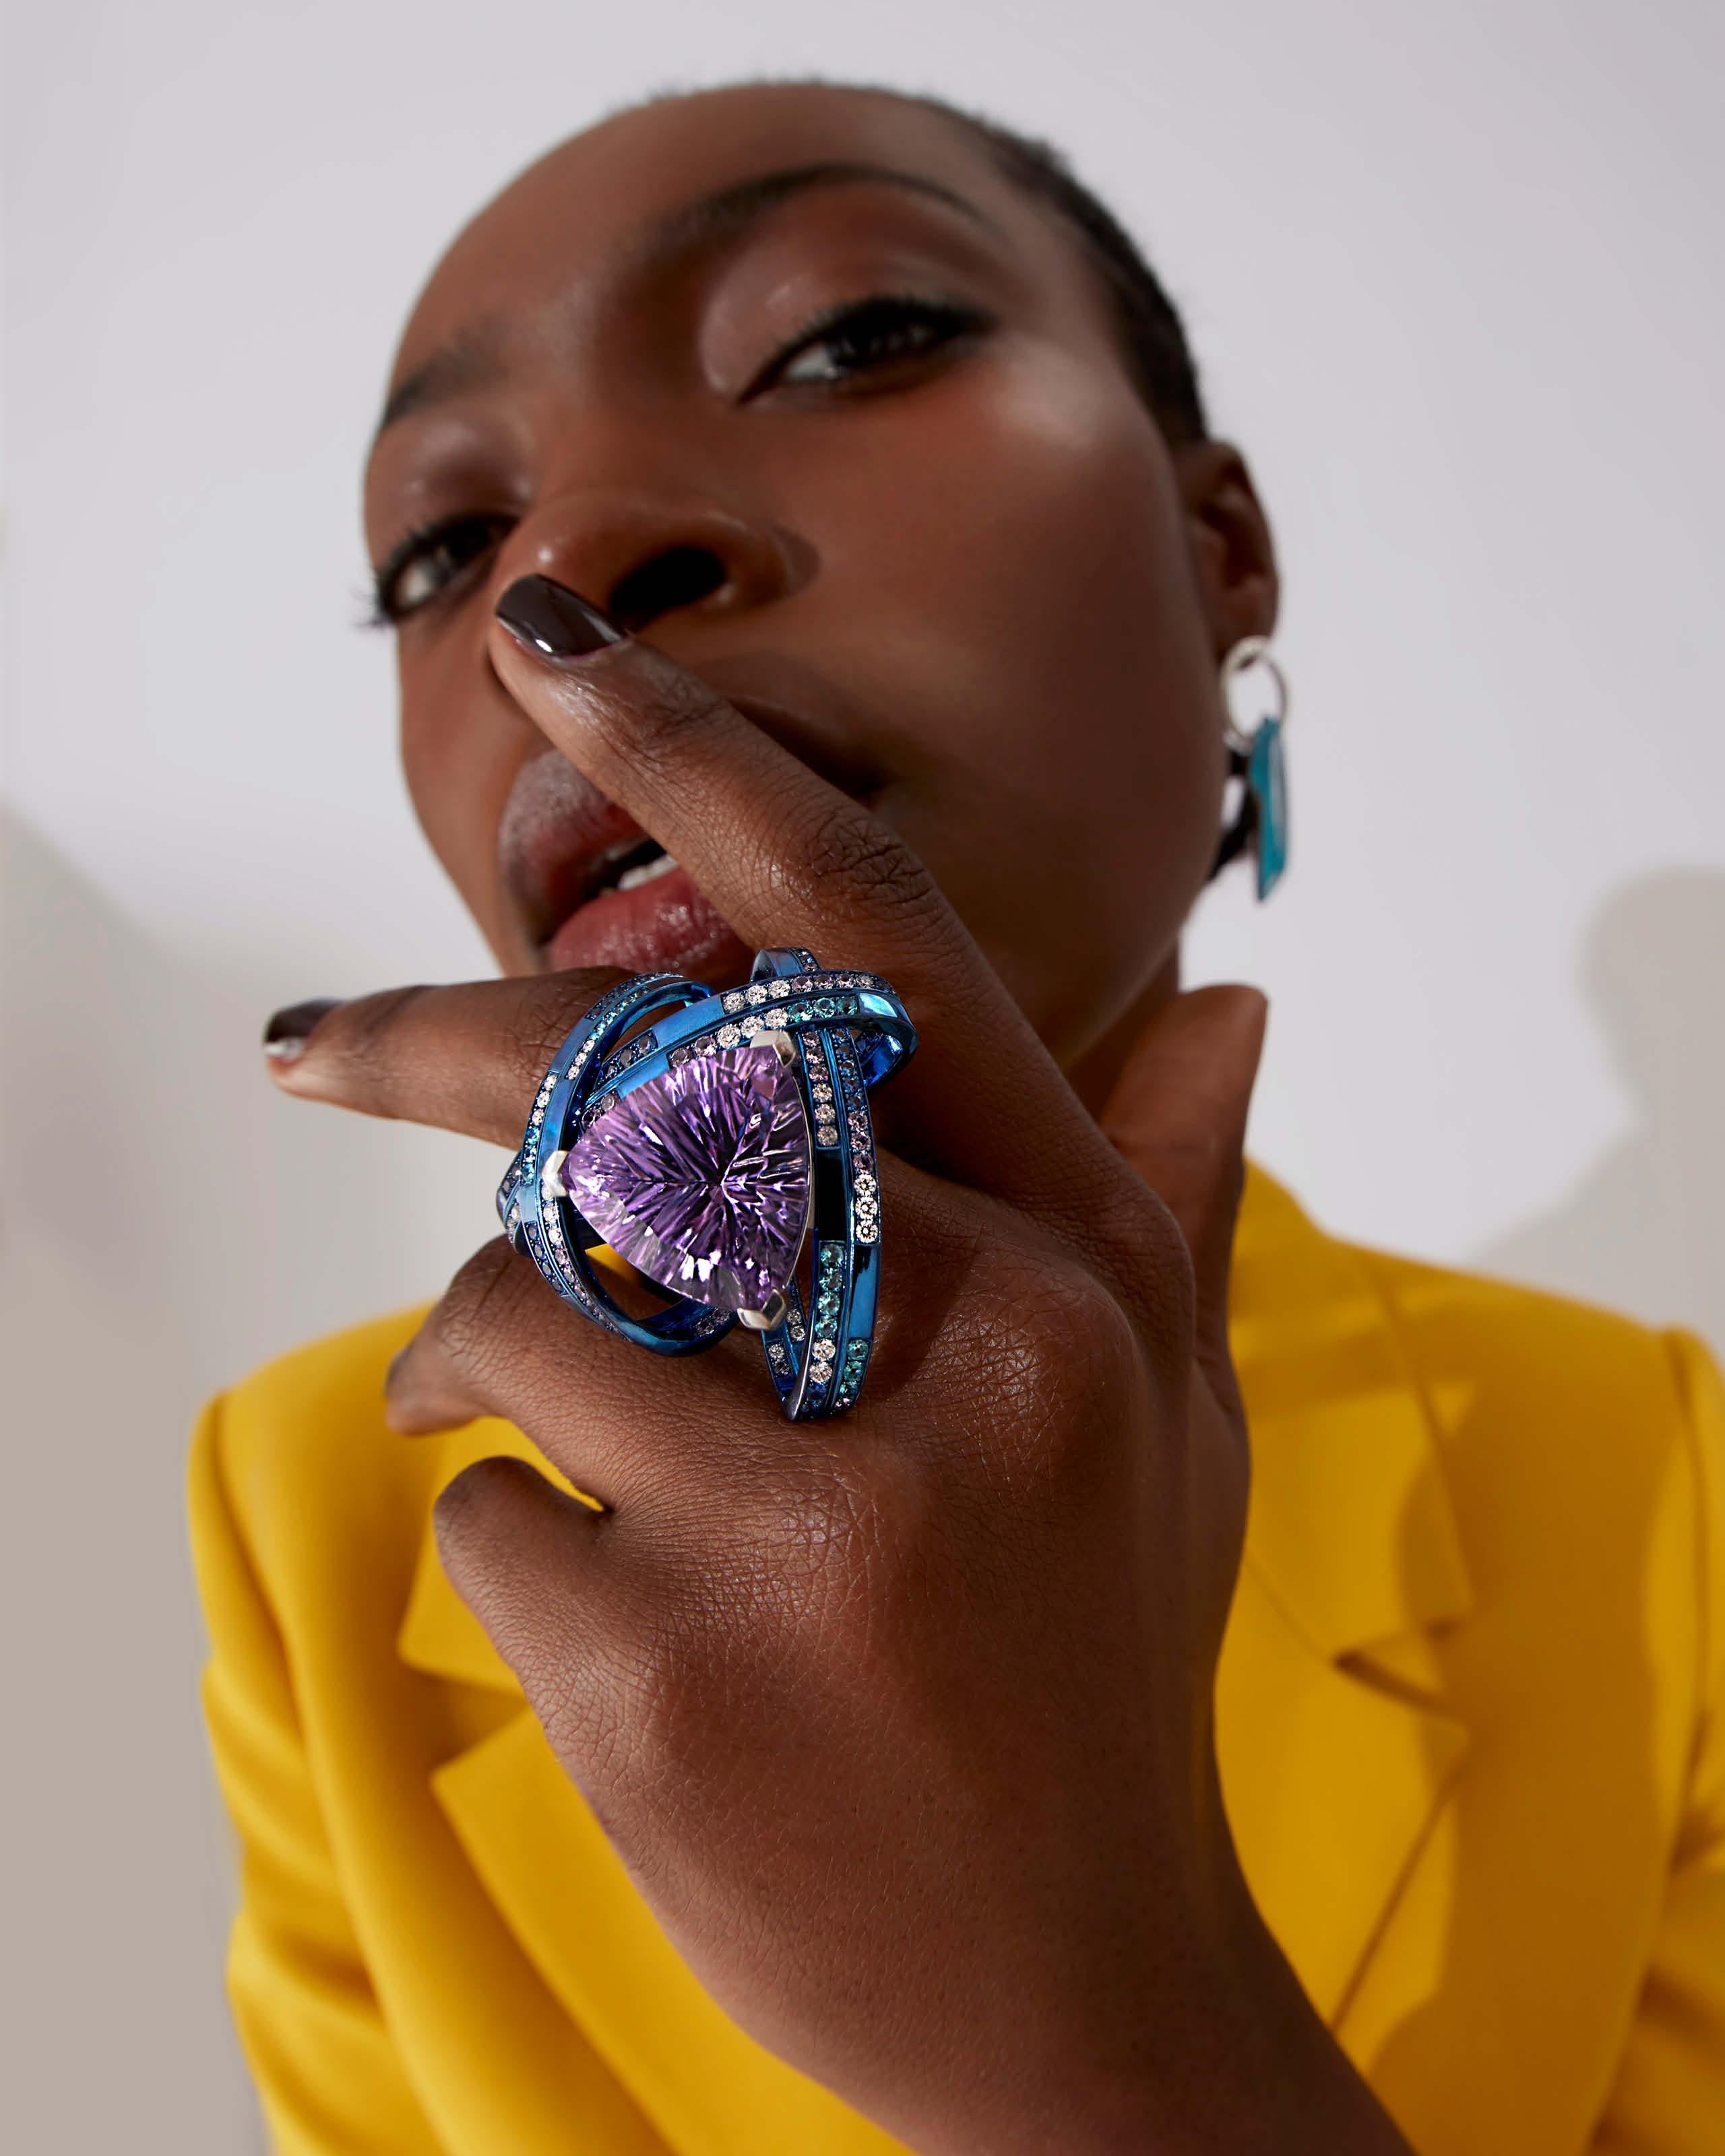 ‘The ReBelles’, takes inspiration from heroines throughout history, celebrating their achievements, intellects, and courage. Comprising of seven limited-edition made-to order cocktail rings, each piece showcases Stephen Webster’s impeccable